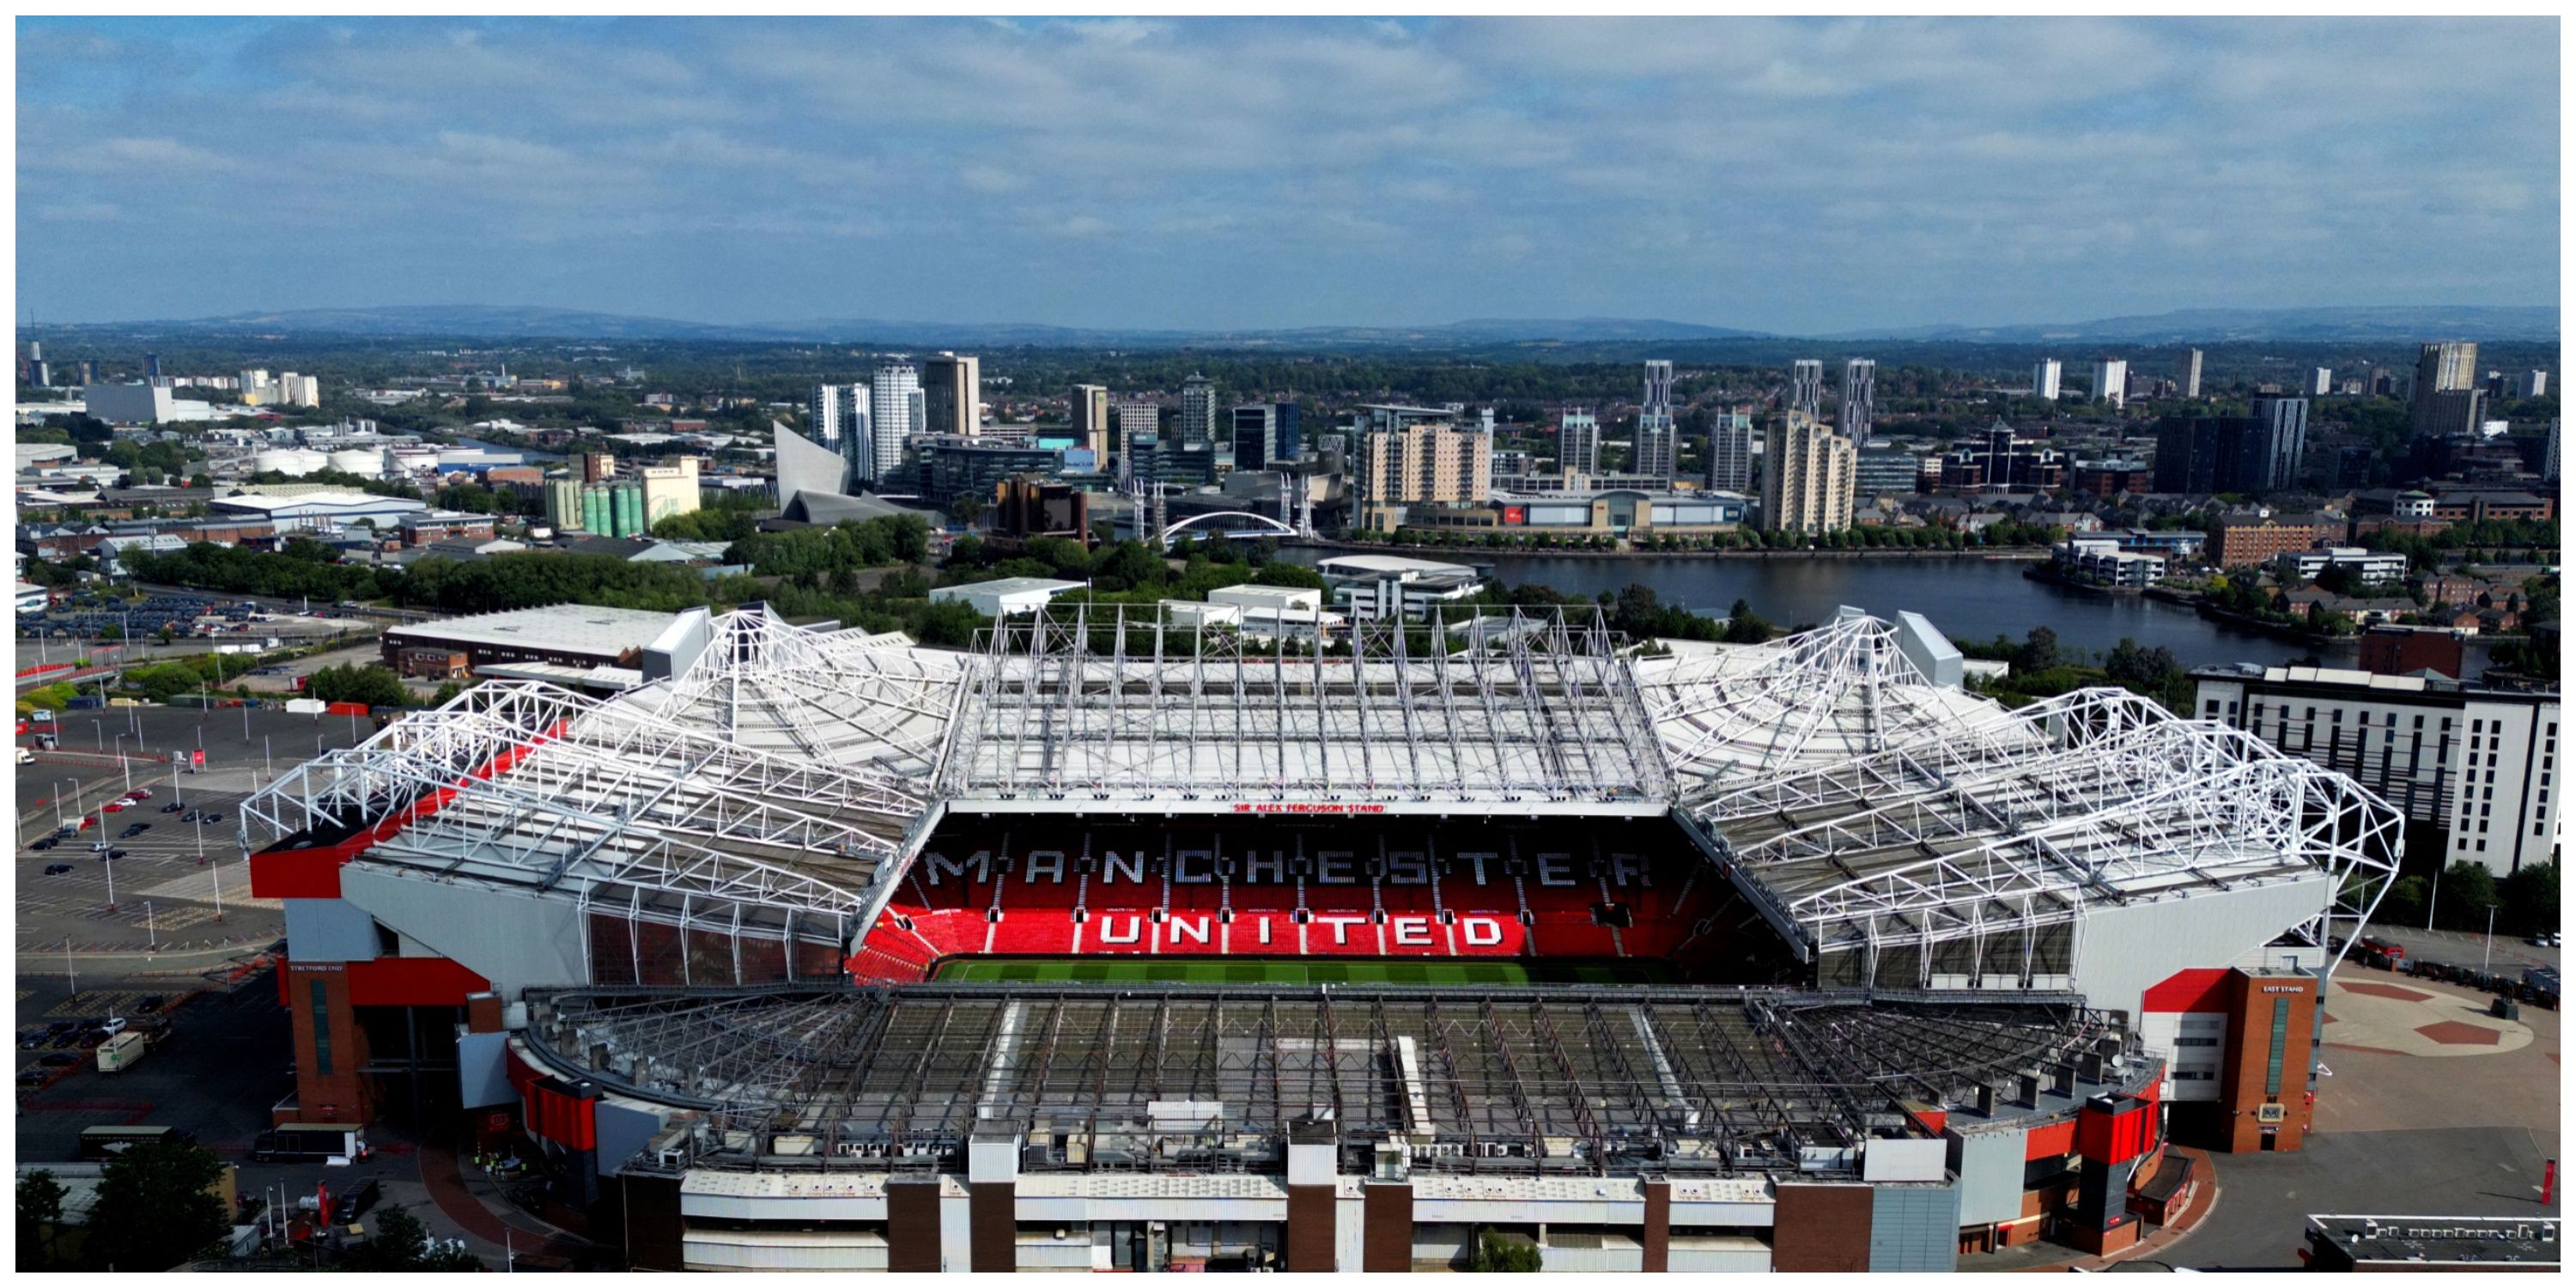 Exciting Sir Jim Ratcliffe update now shared from Man Utd with